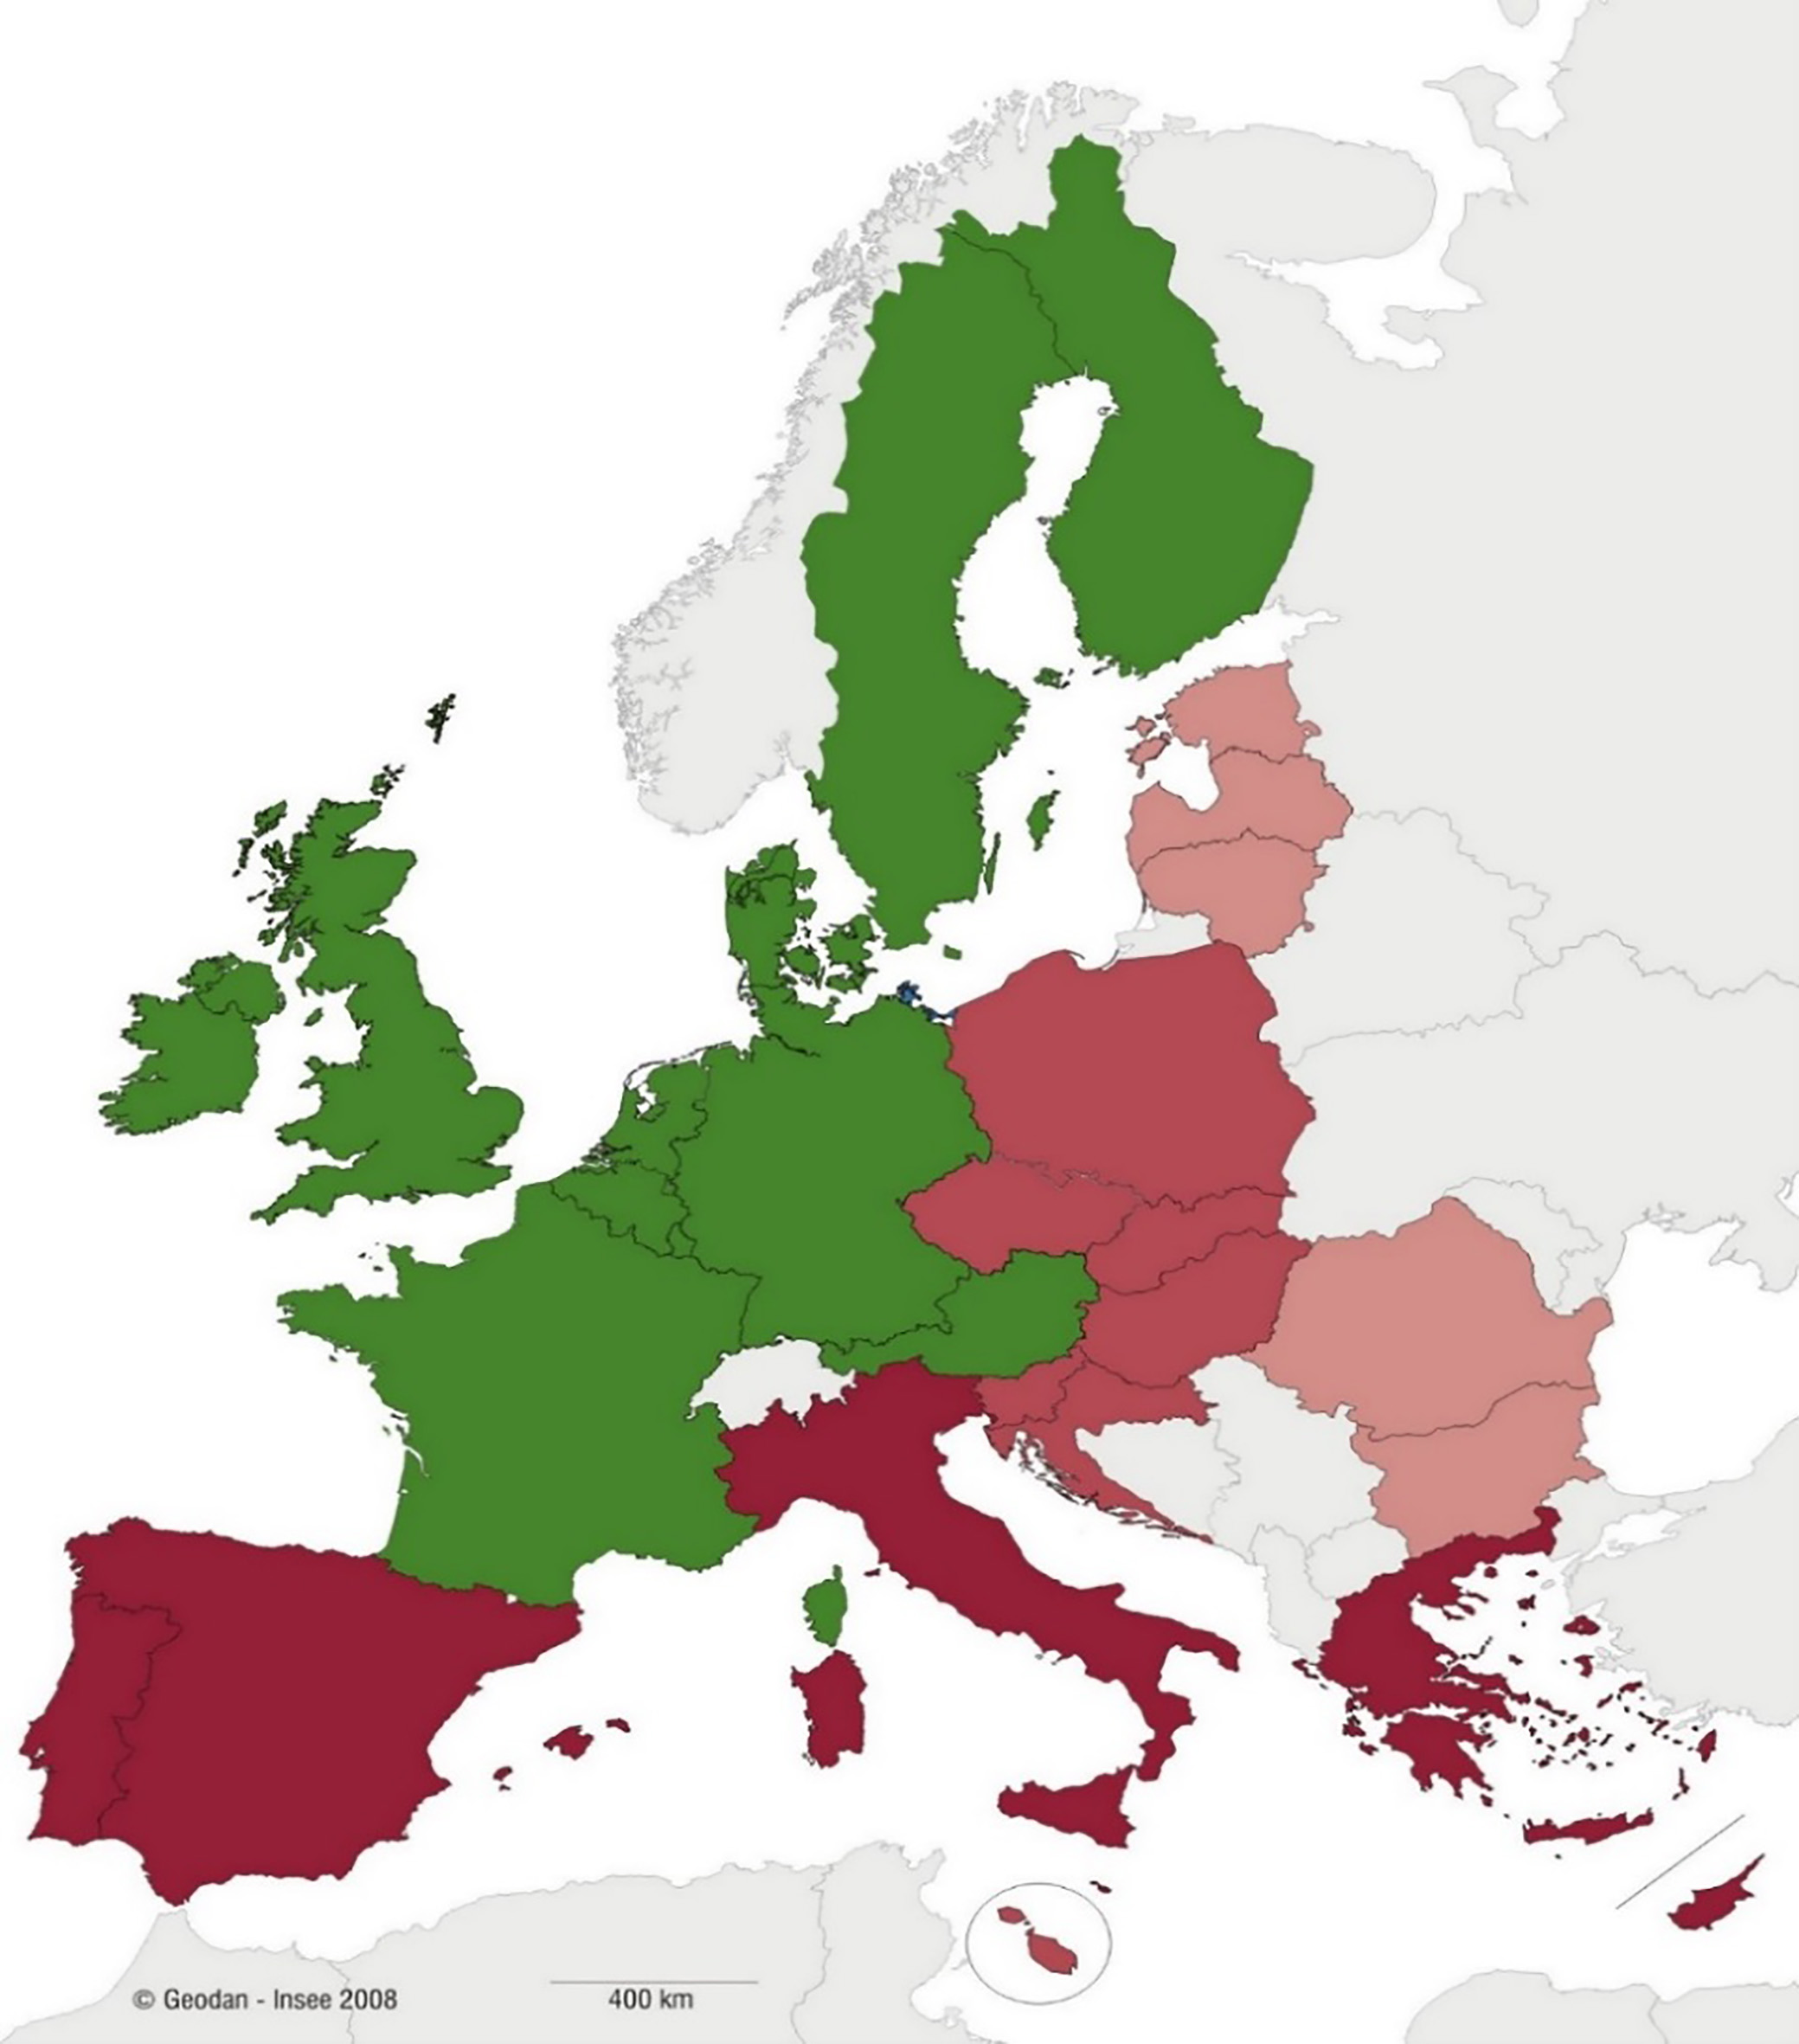 Classification of the EU countries for the SDG indicators. Source: Eurostat; authors’ calculations. Notes: On this map, Western and Northern Europe is shown in green; Eastern and Southern Europe has been split into three subgroups, shown in different shades of red: Southern Europe; Eastern Europe and Malta; Baltic states, Bulgaria and Romania.